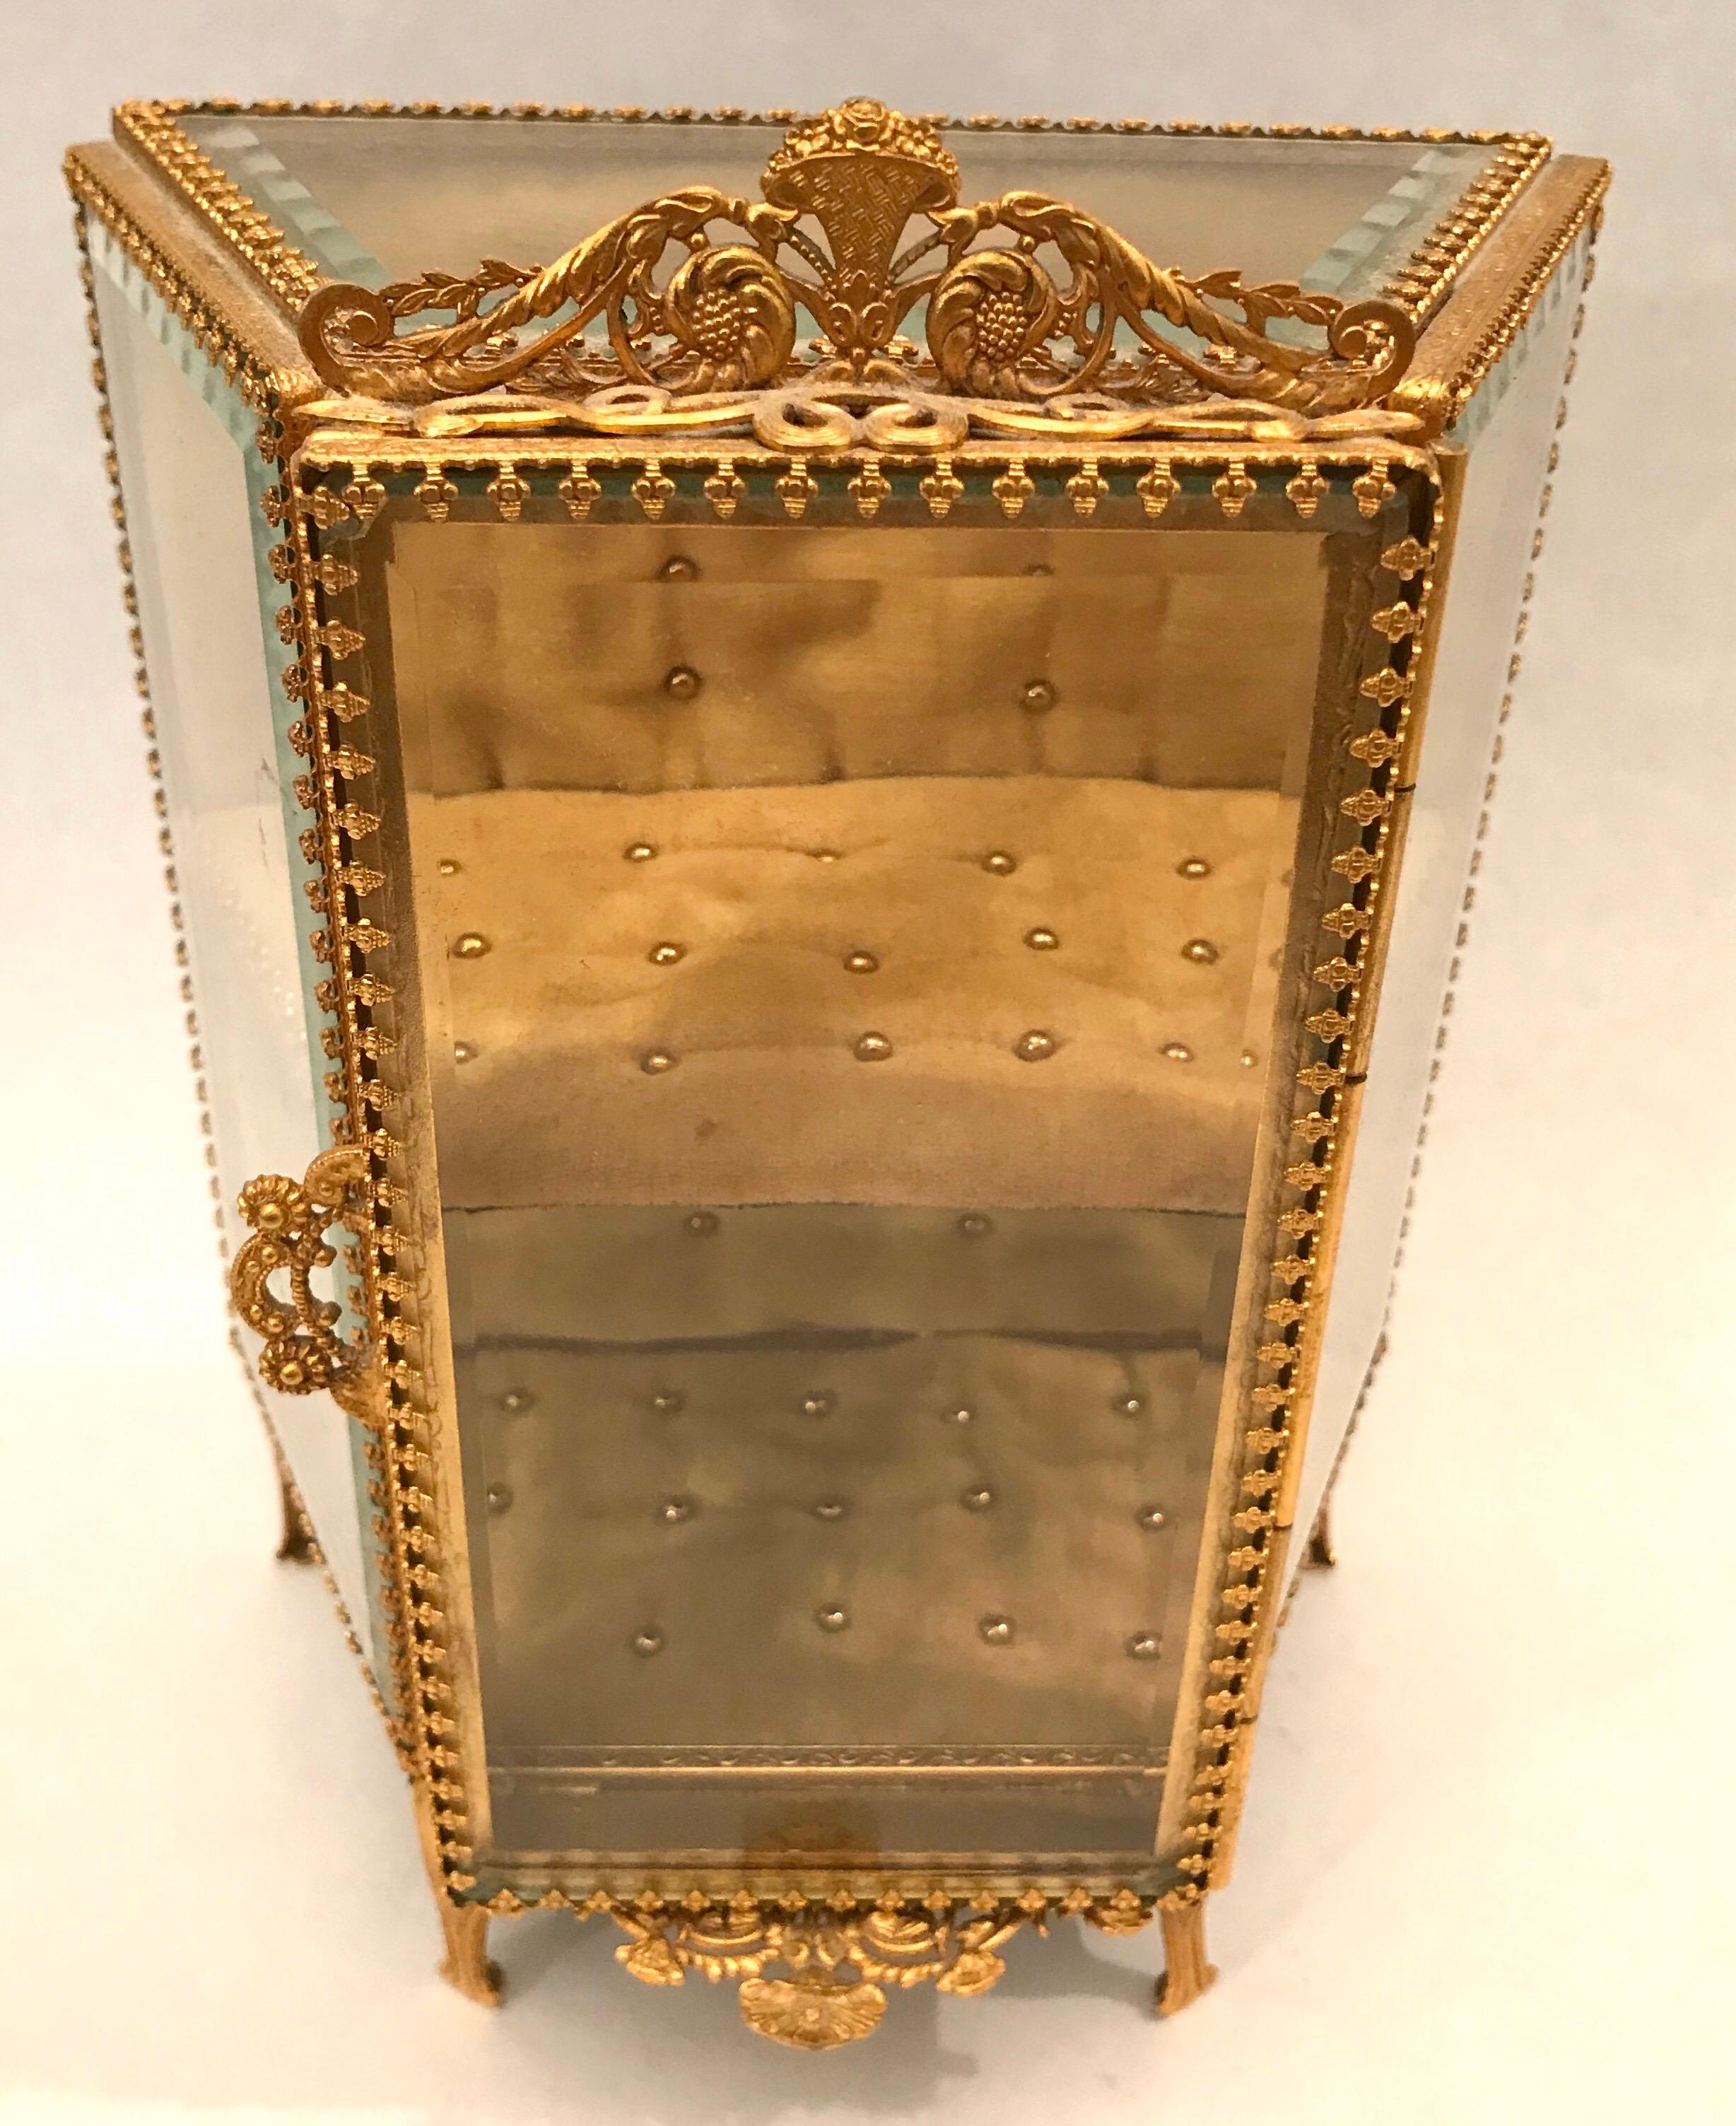 Gilt ormolu and beveled glass jewelry box or display in the form of a miniature vitrine.